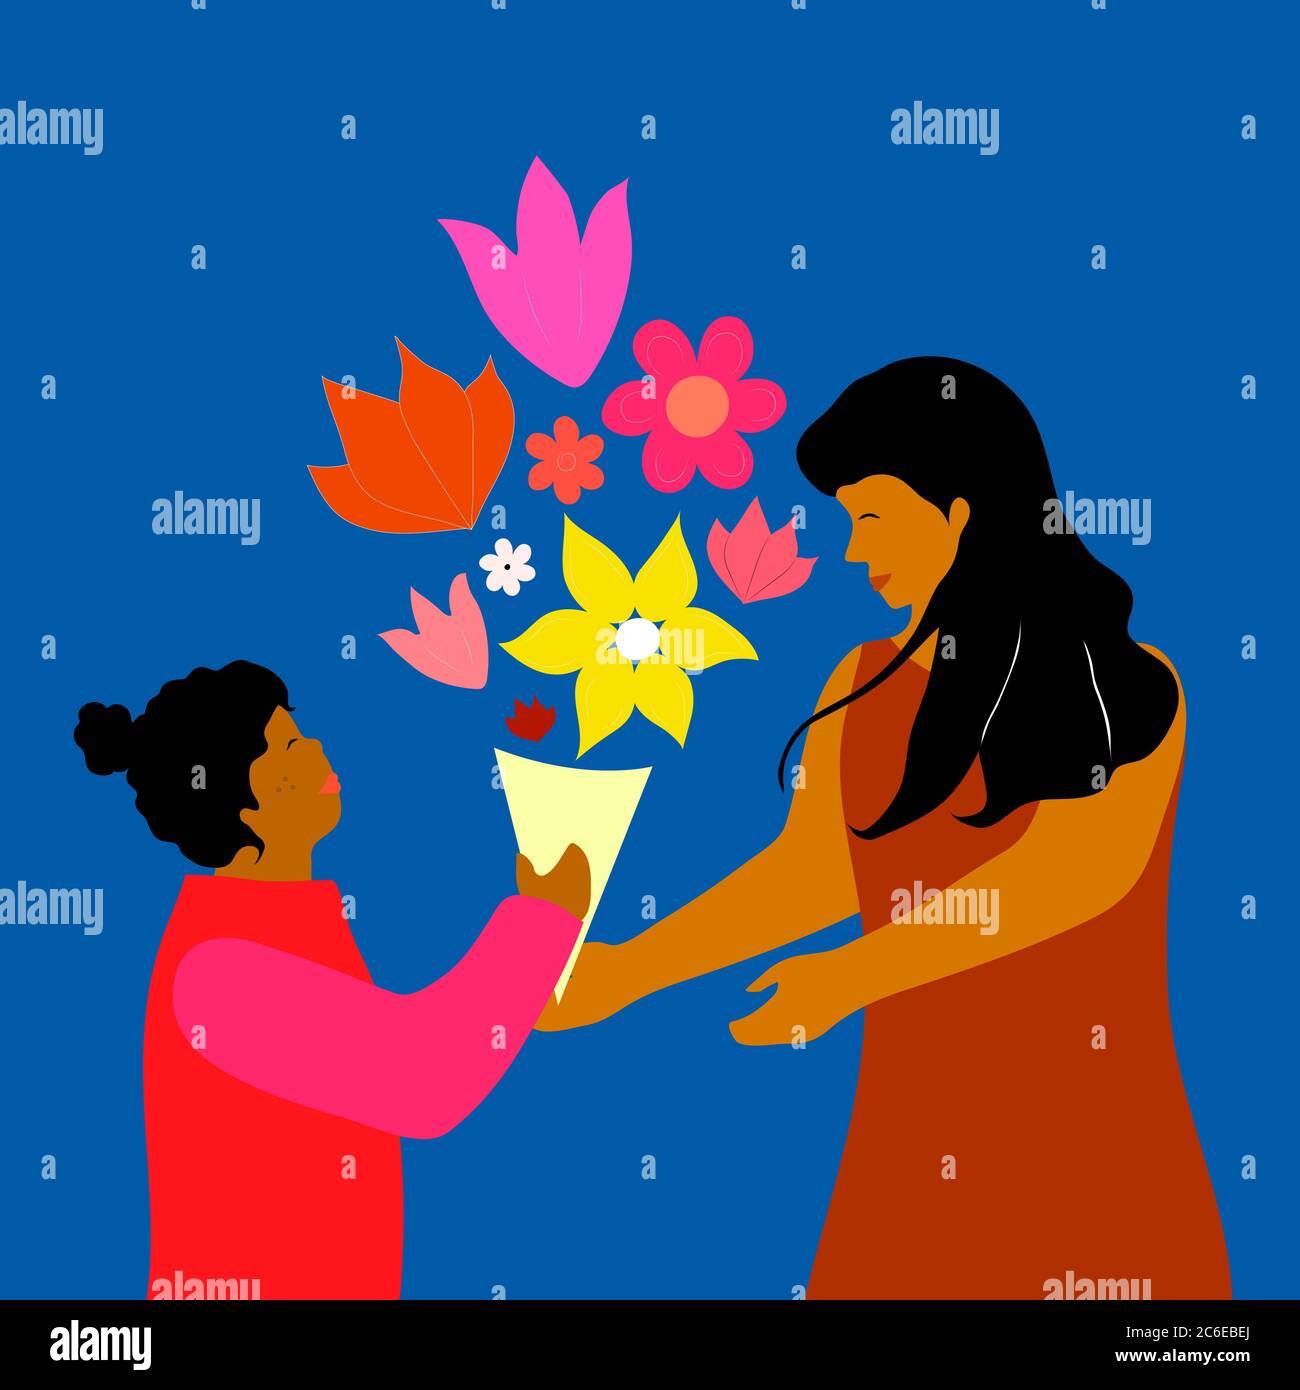 Floral mother's day illustration with mother and daughter. Illustrations for a cute cover, poster, banner or card for the holiday moms. Stock Vector